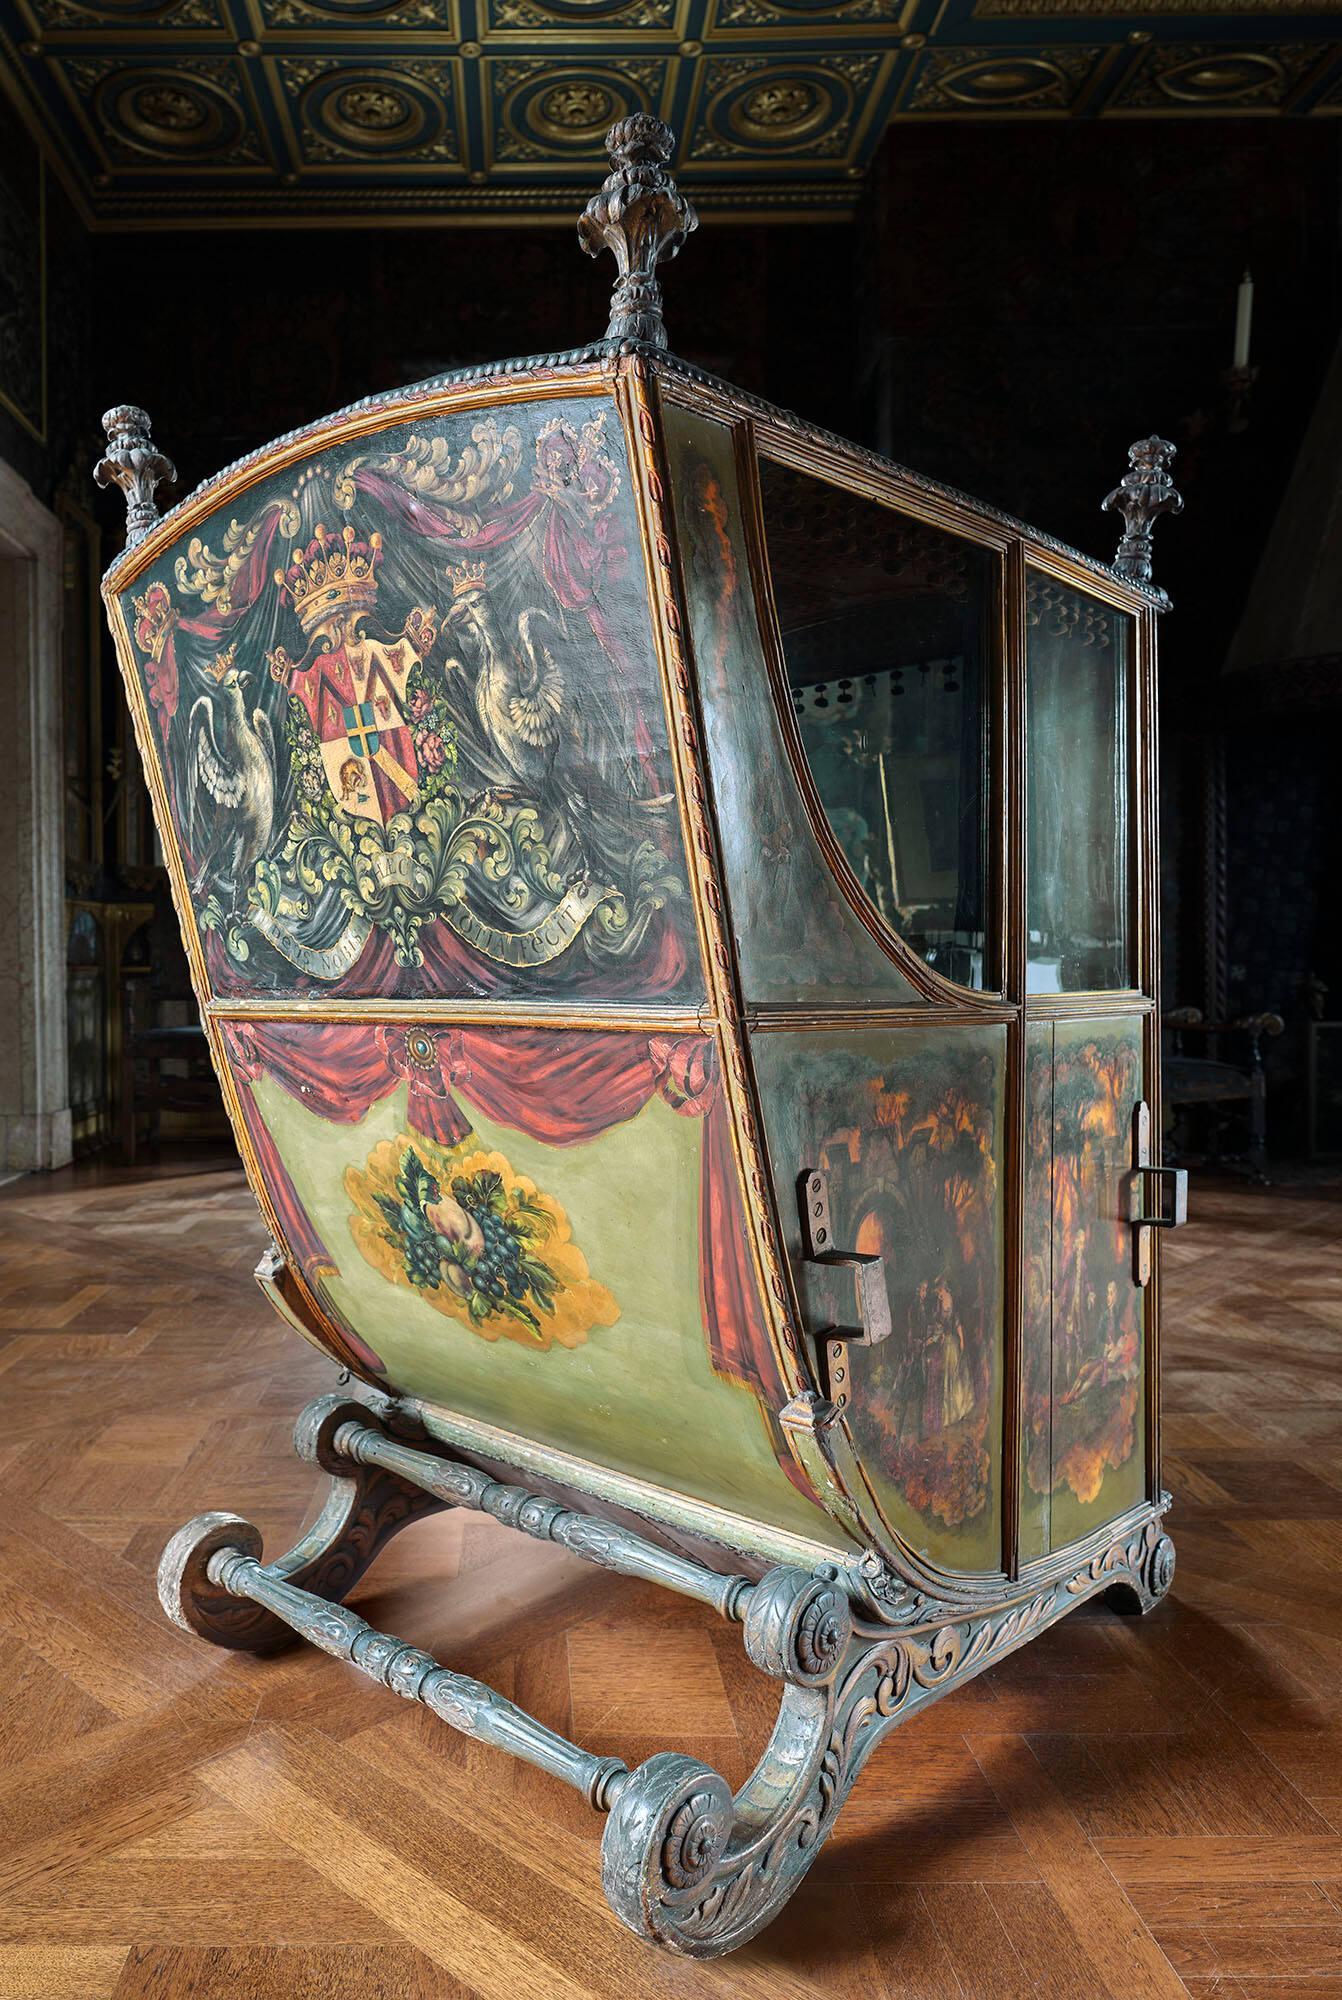 Back of the sedan chair in the Gardner Museum’s Veronese Room, with a large painting featuring a coat of arms and two crown-wearing birds surrounded by sprawling greenery and holding a ribbon adorned with text